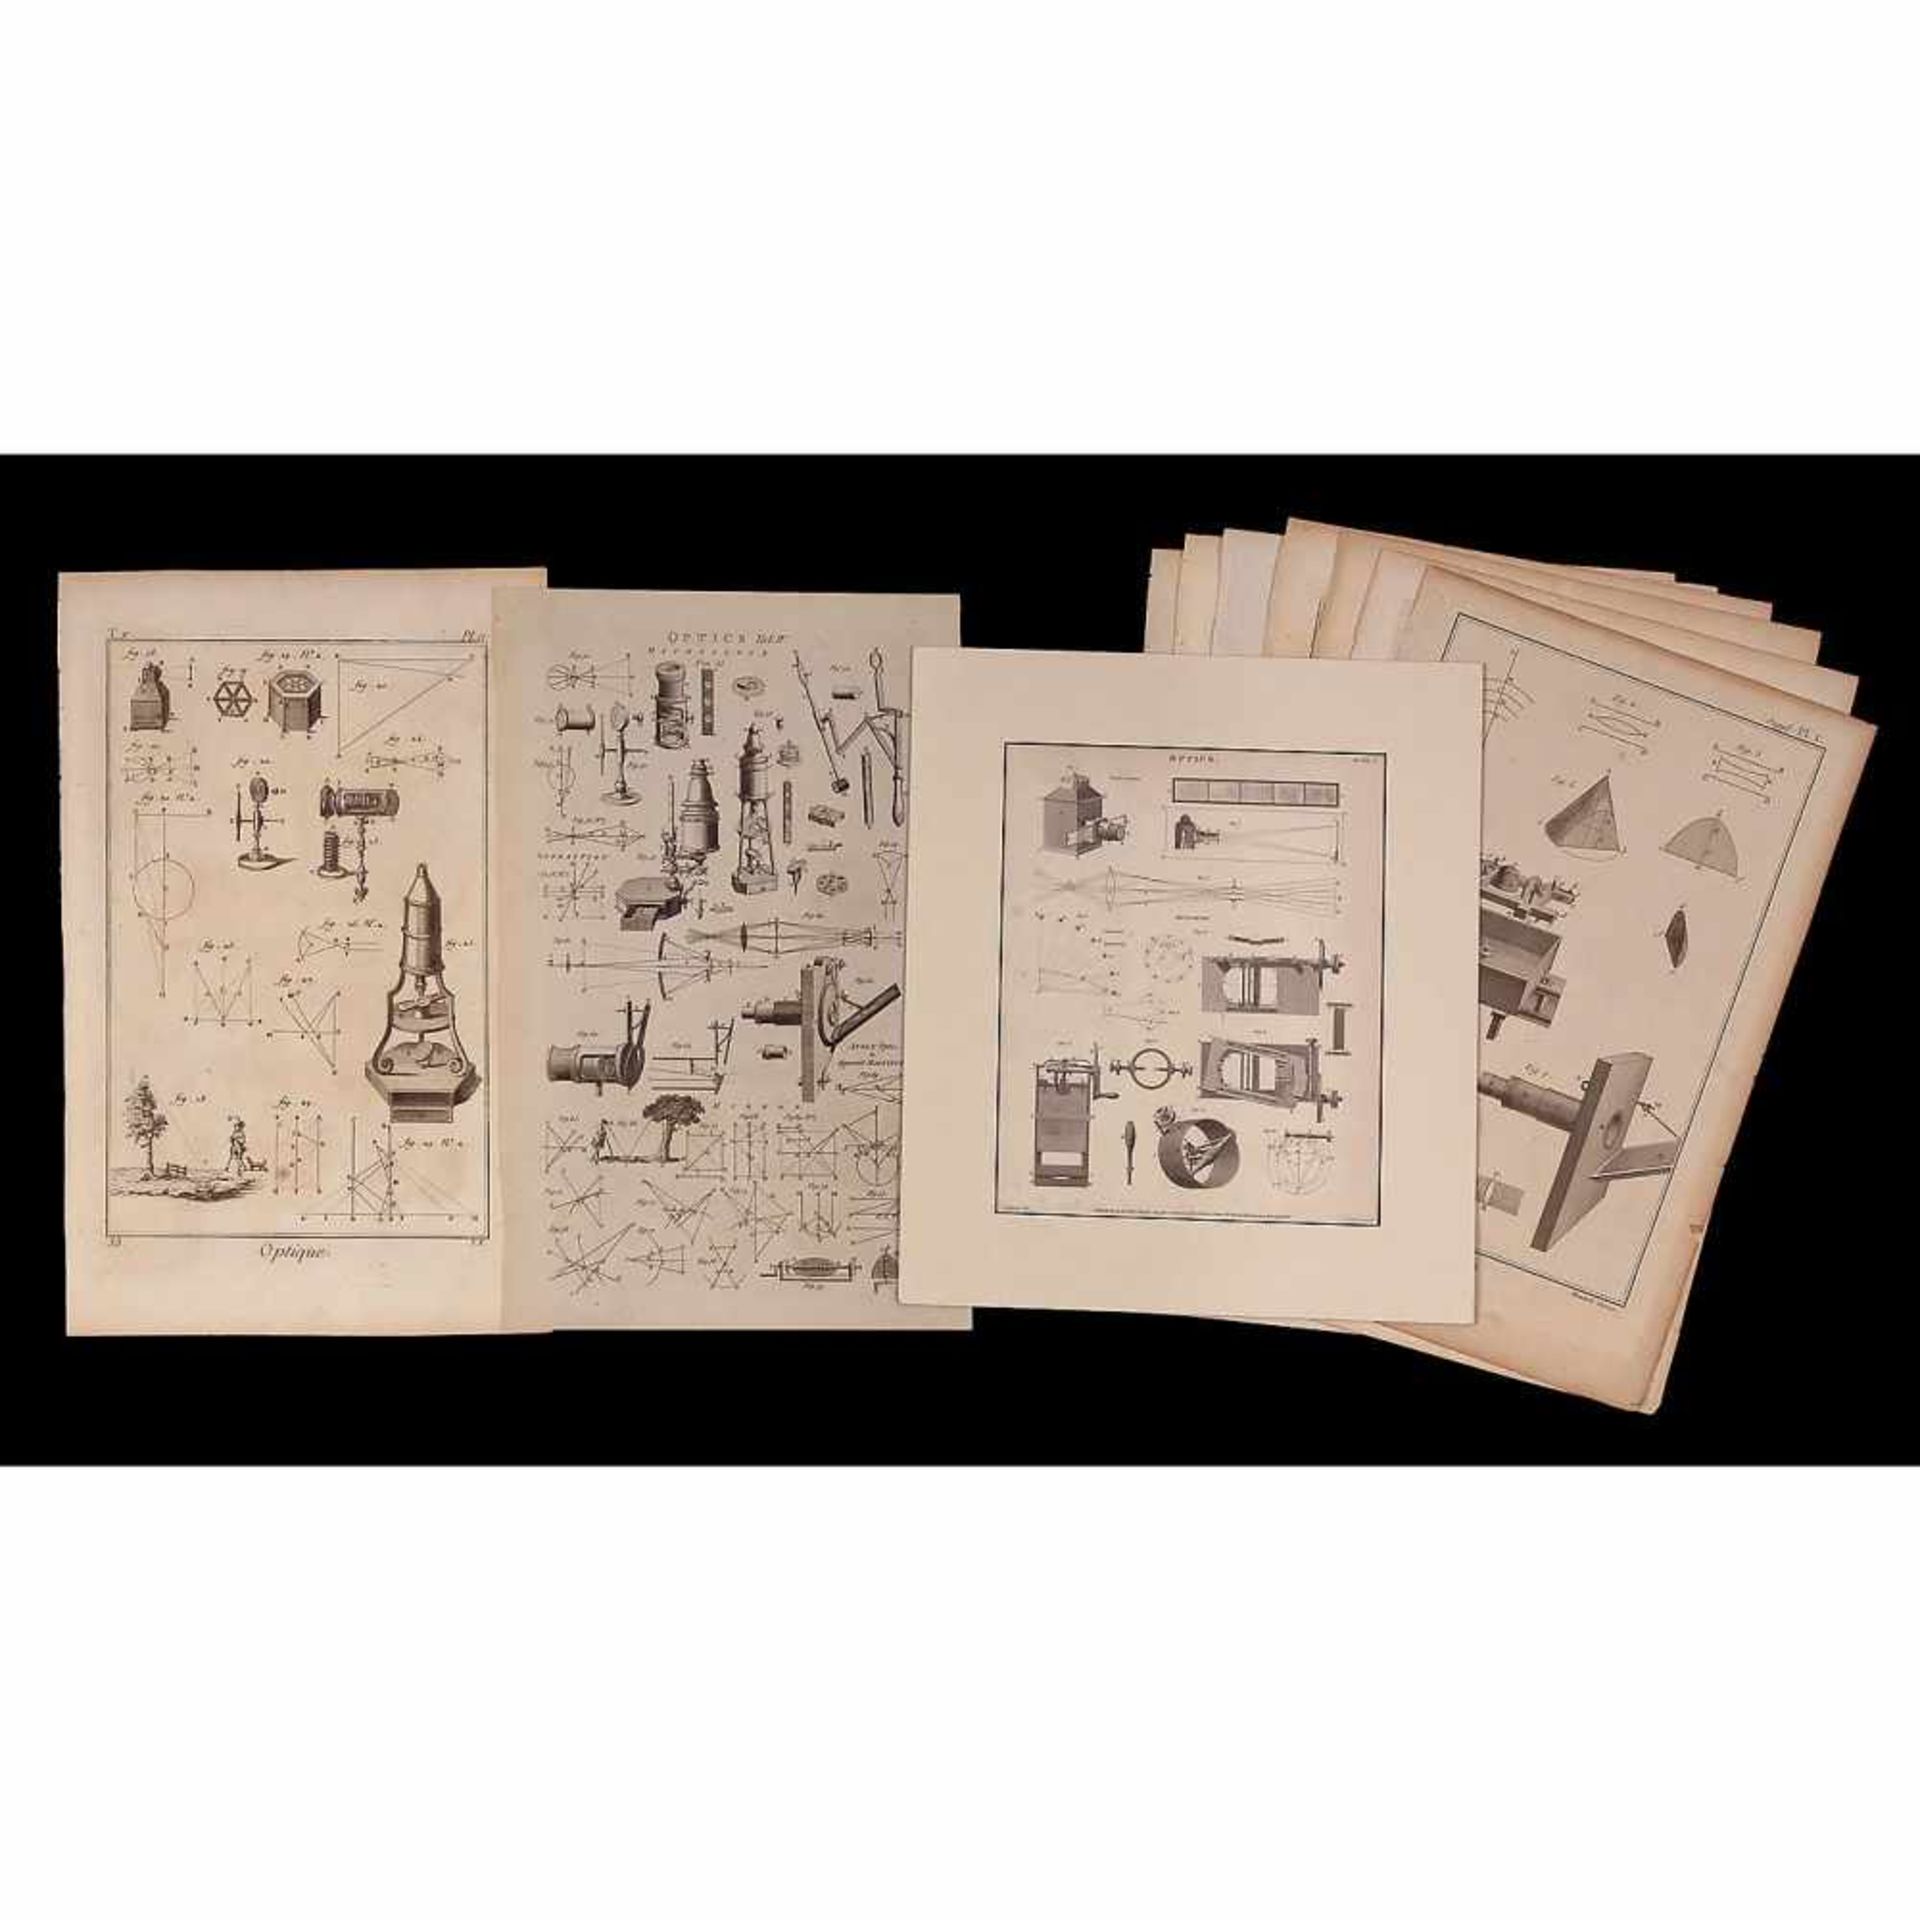 10 Optical Bookplates, c. 18609 French plates 16 1/6 x 10 1/5 in., depicting the microscope, magic